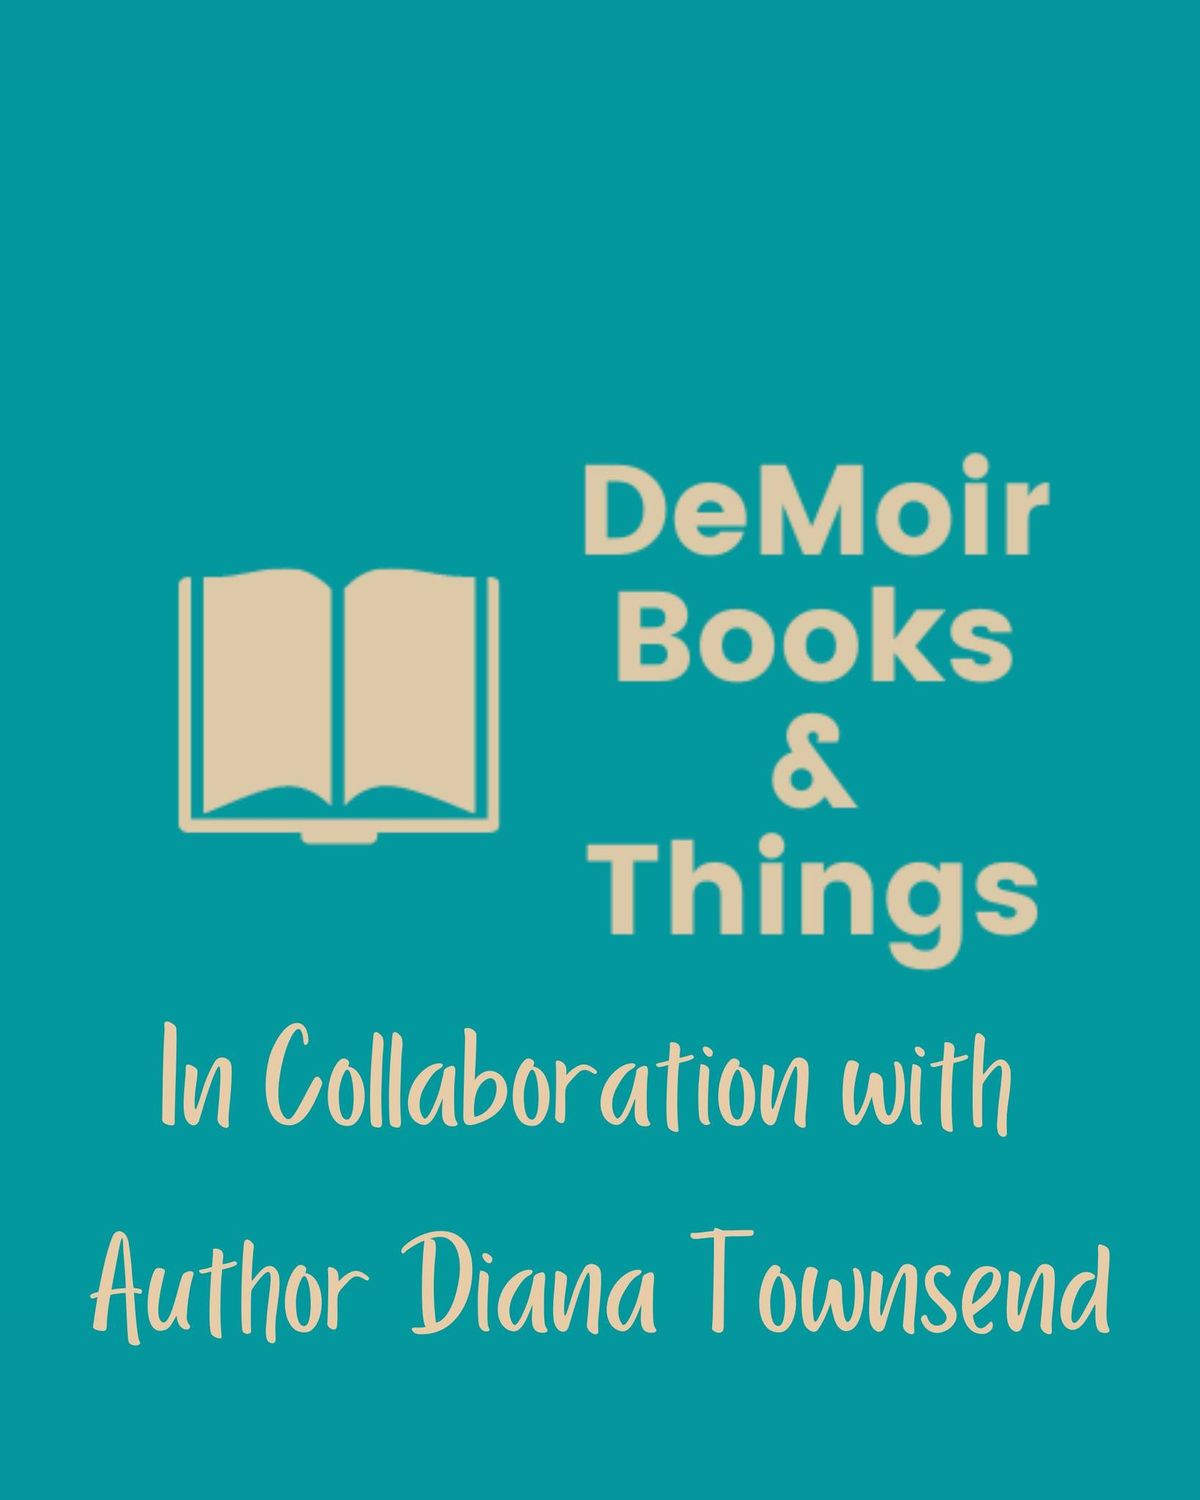 DeMoir Books Grand Reopening w Author Diana Townsend